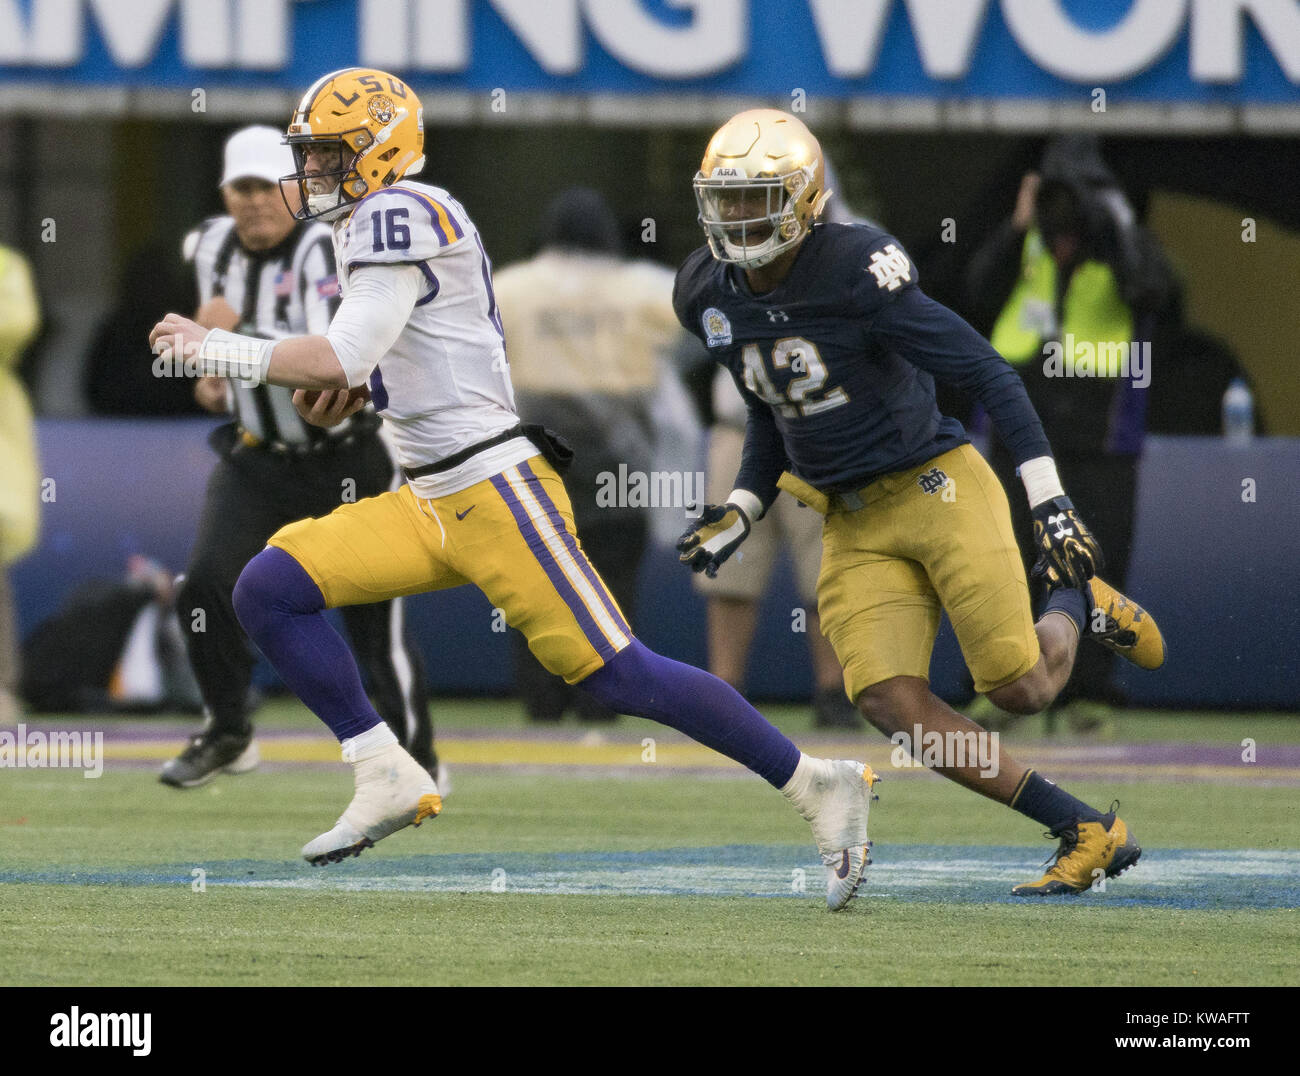 Orlando, Florida, USA. 1st January, 2018. LSU quarterback DANNY ETLING (16) scrambles for a first down in the second half of the Florida Citrus Bowl at Camping World Stadium. Credit: Jerome Hicks/ZUMA Wire/Alamy Live News Stock Photo